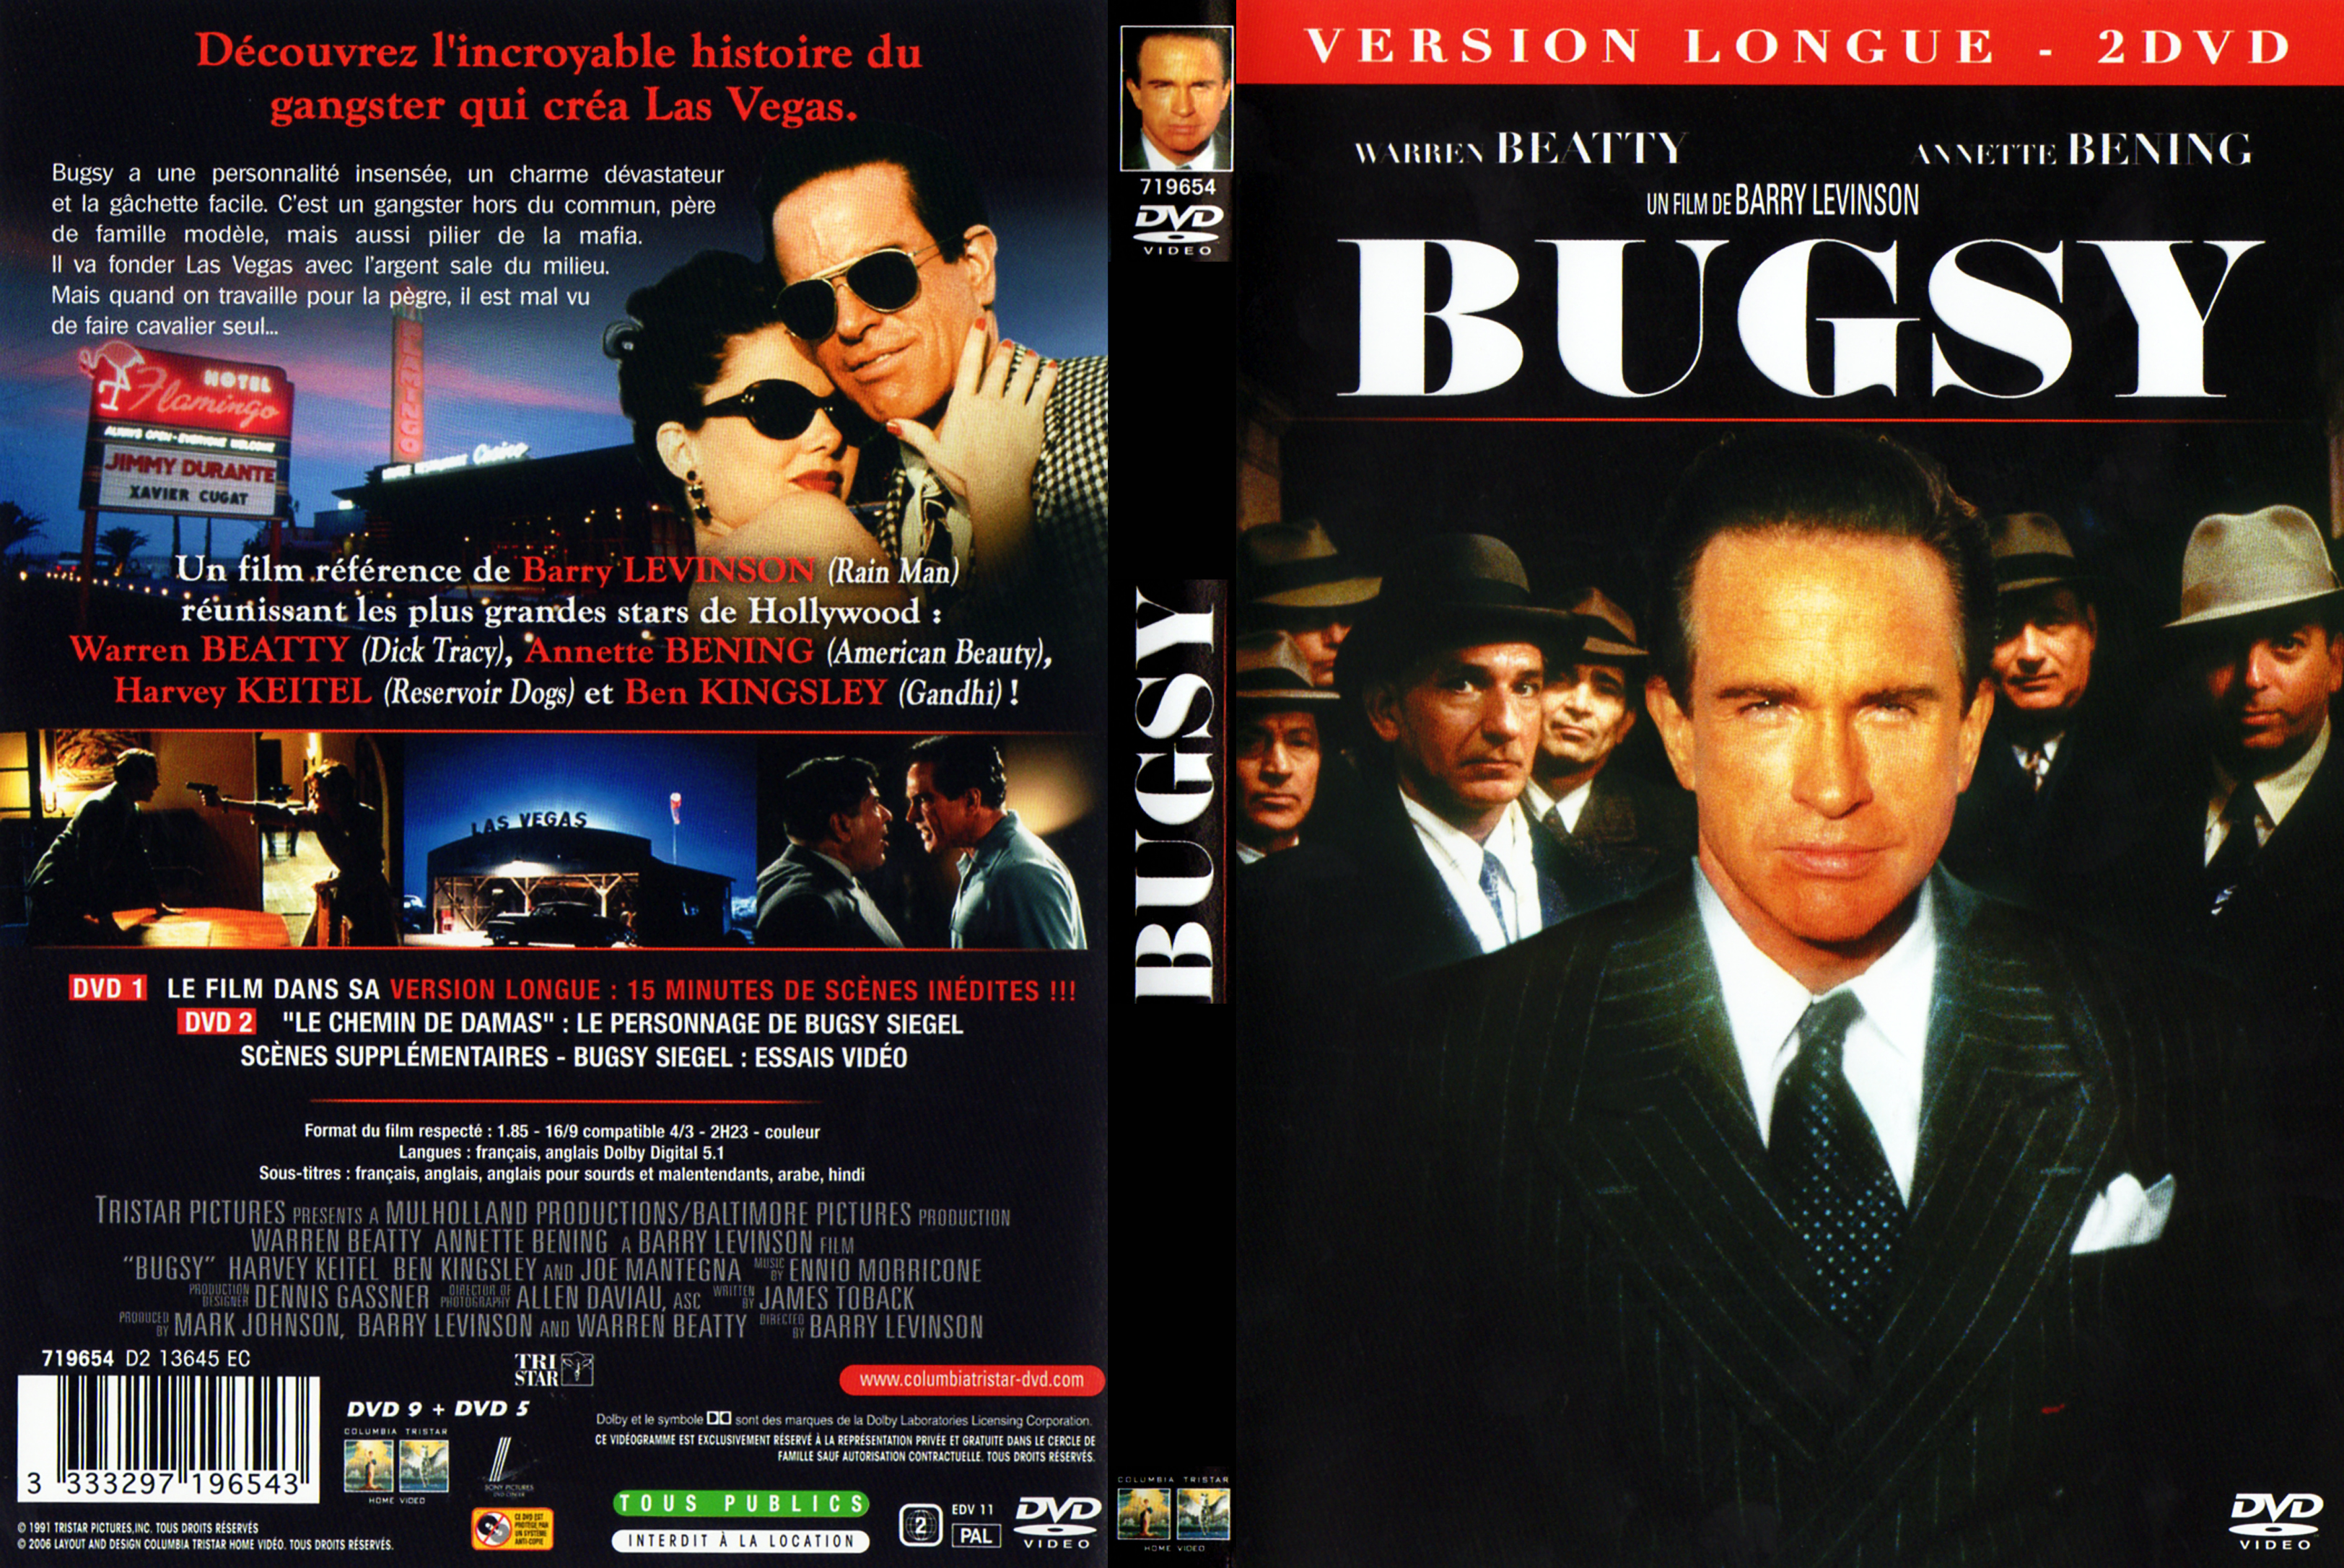 Jaquette DVD Bugsy